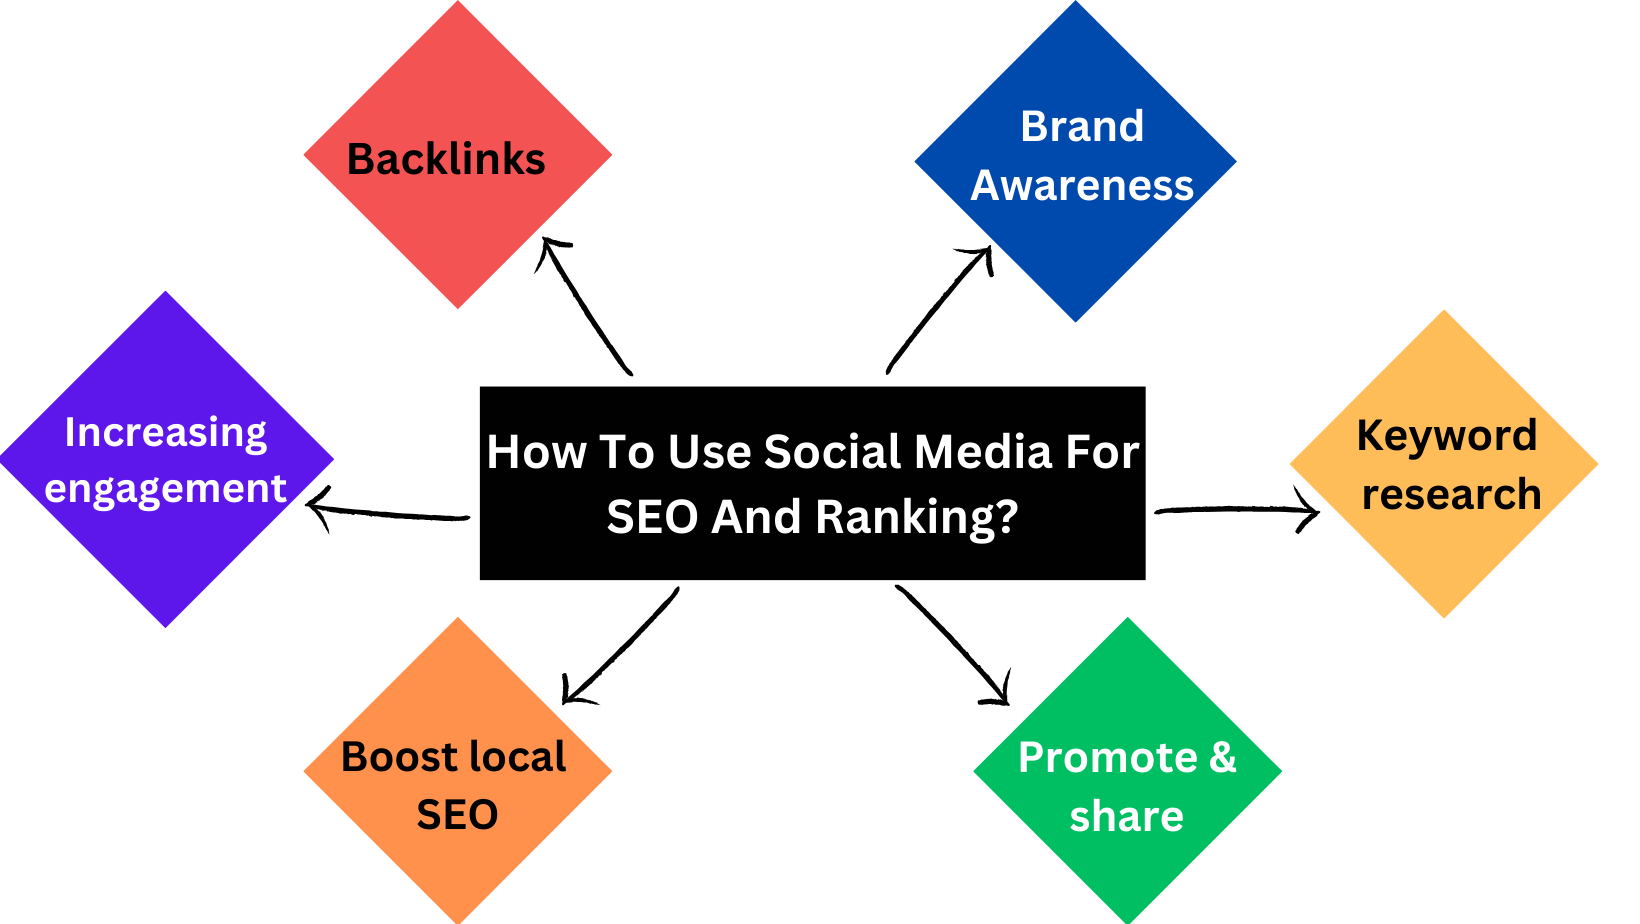 steps To Use Social Media For SEO And Ranking